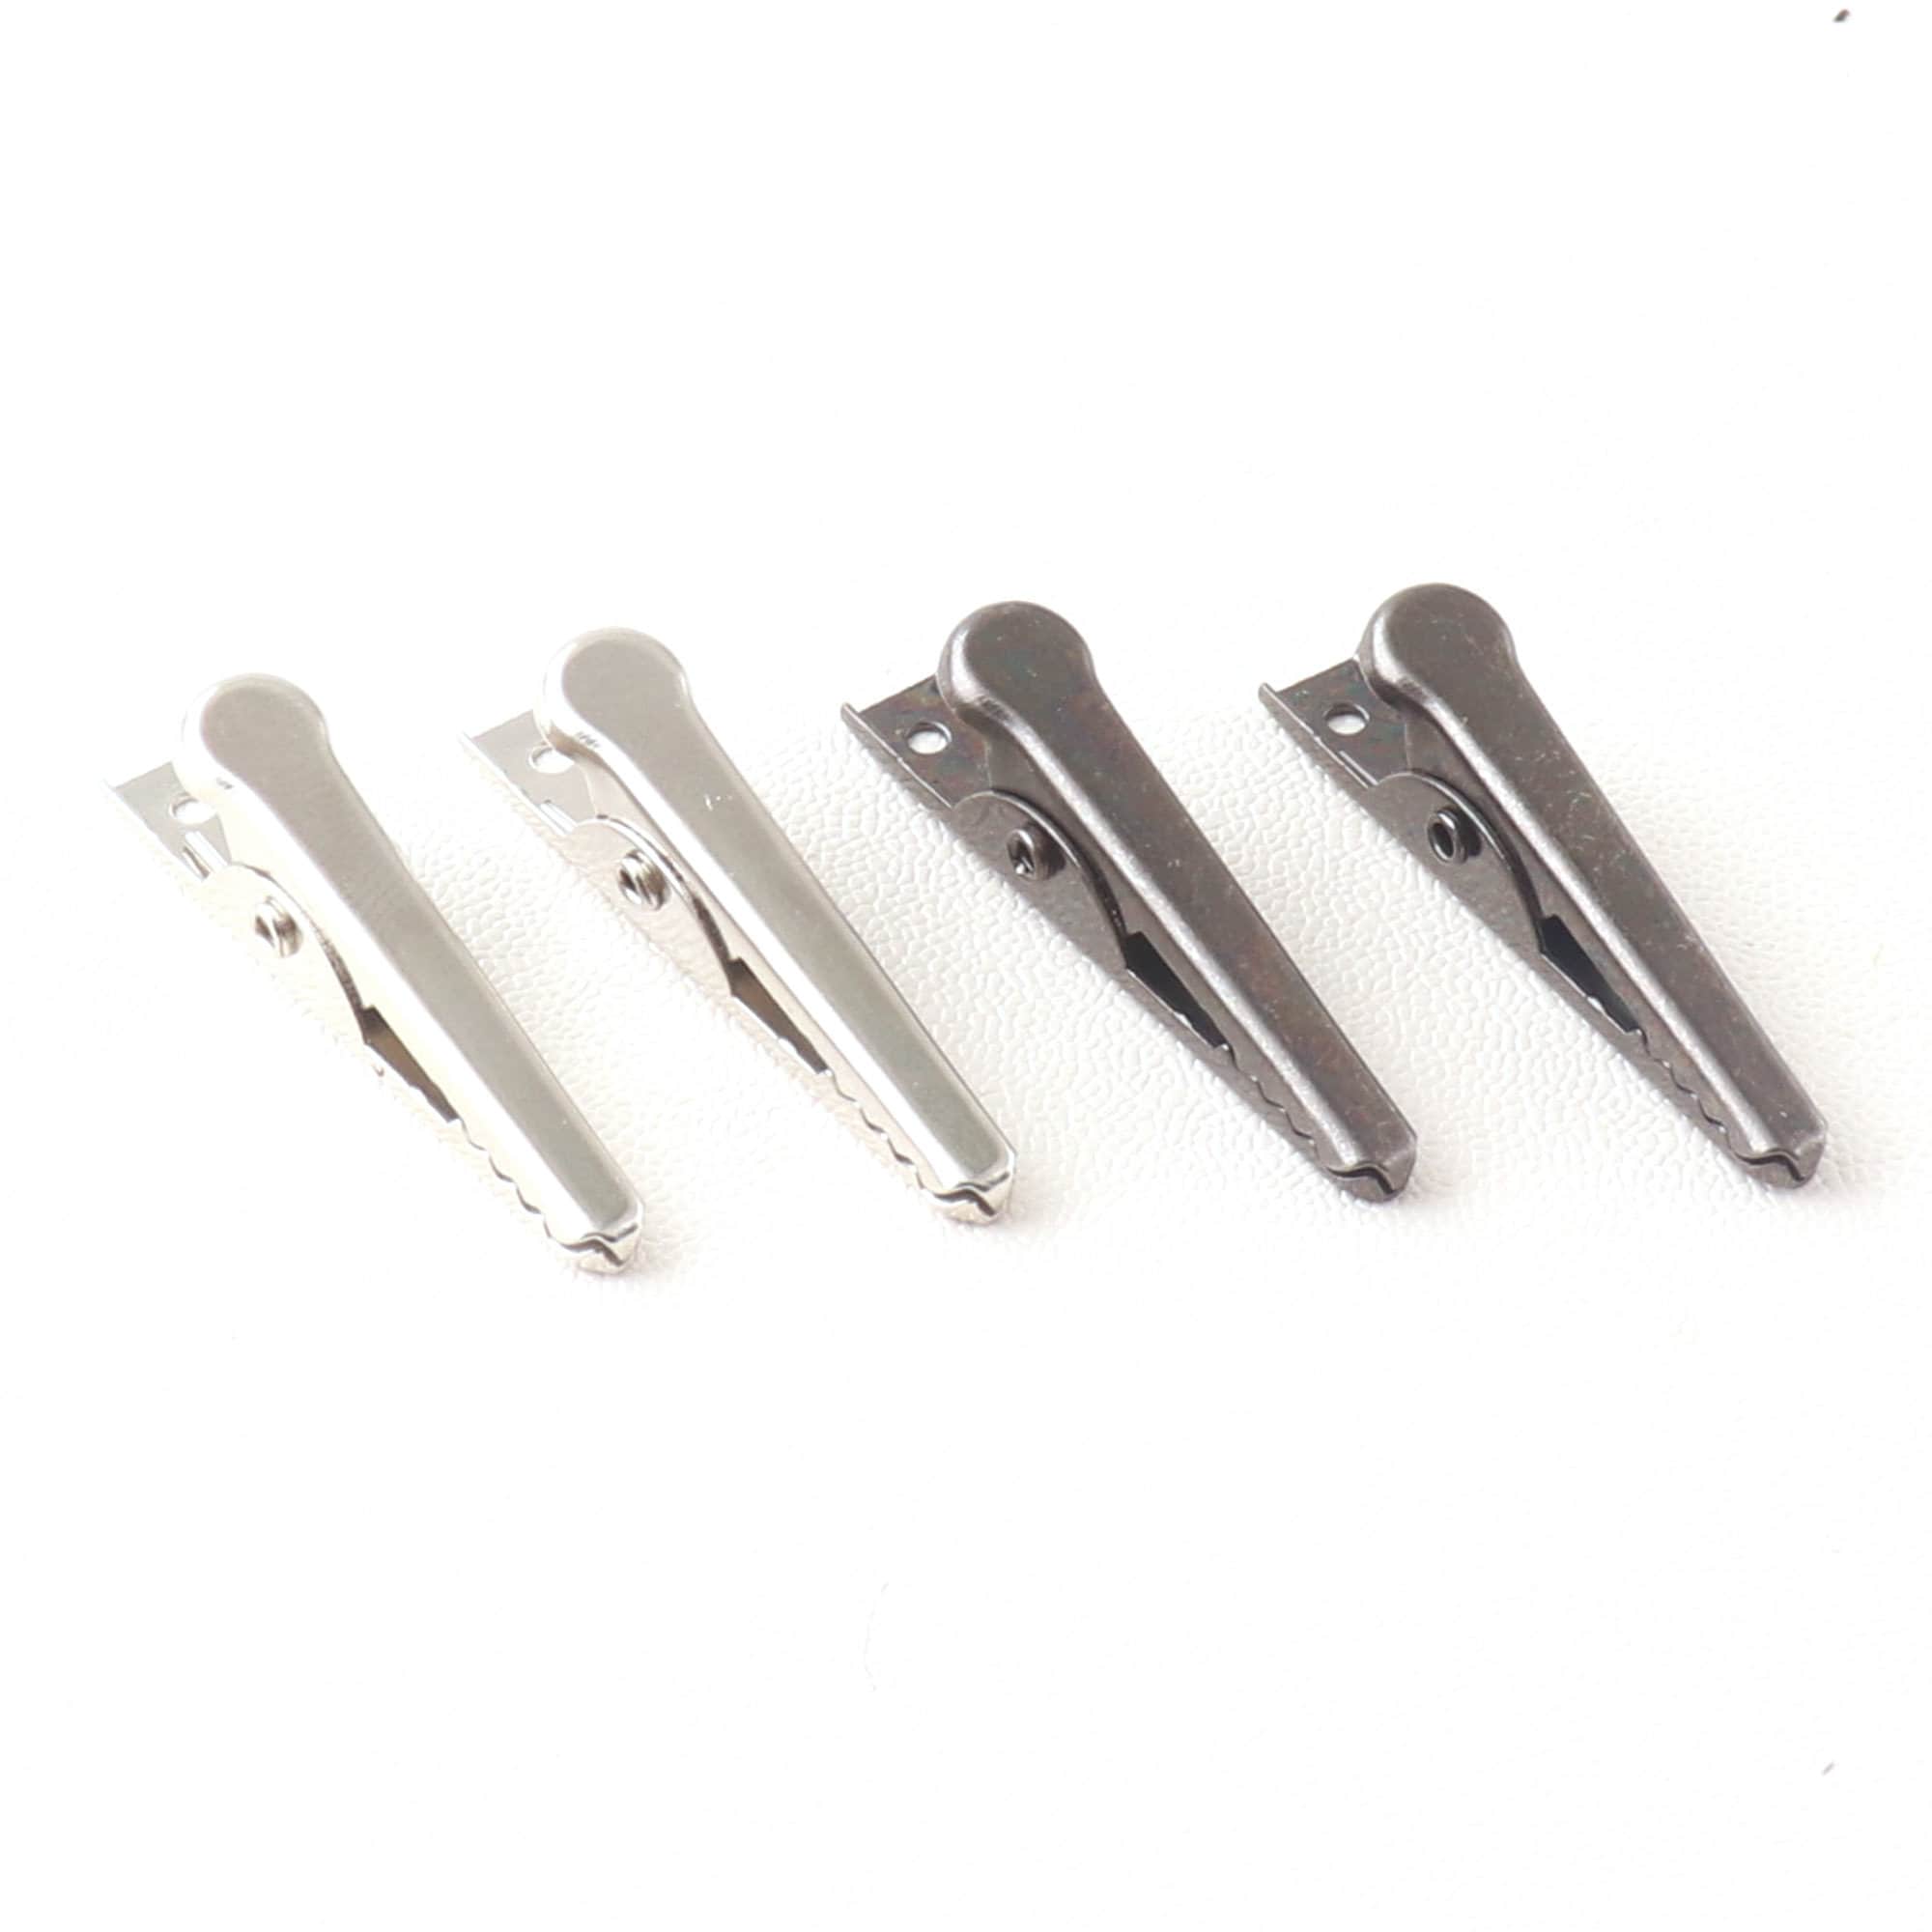 Giant Safety Pins Extra Large 128mm Pins Silver Brooch Jumbo Laundry Safety  Pins FOR Sewing Jewelry Making Stitch Makers Pins Charm-2pcs 